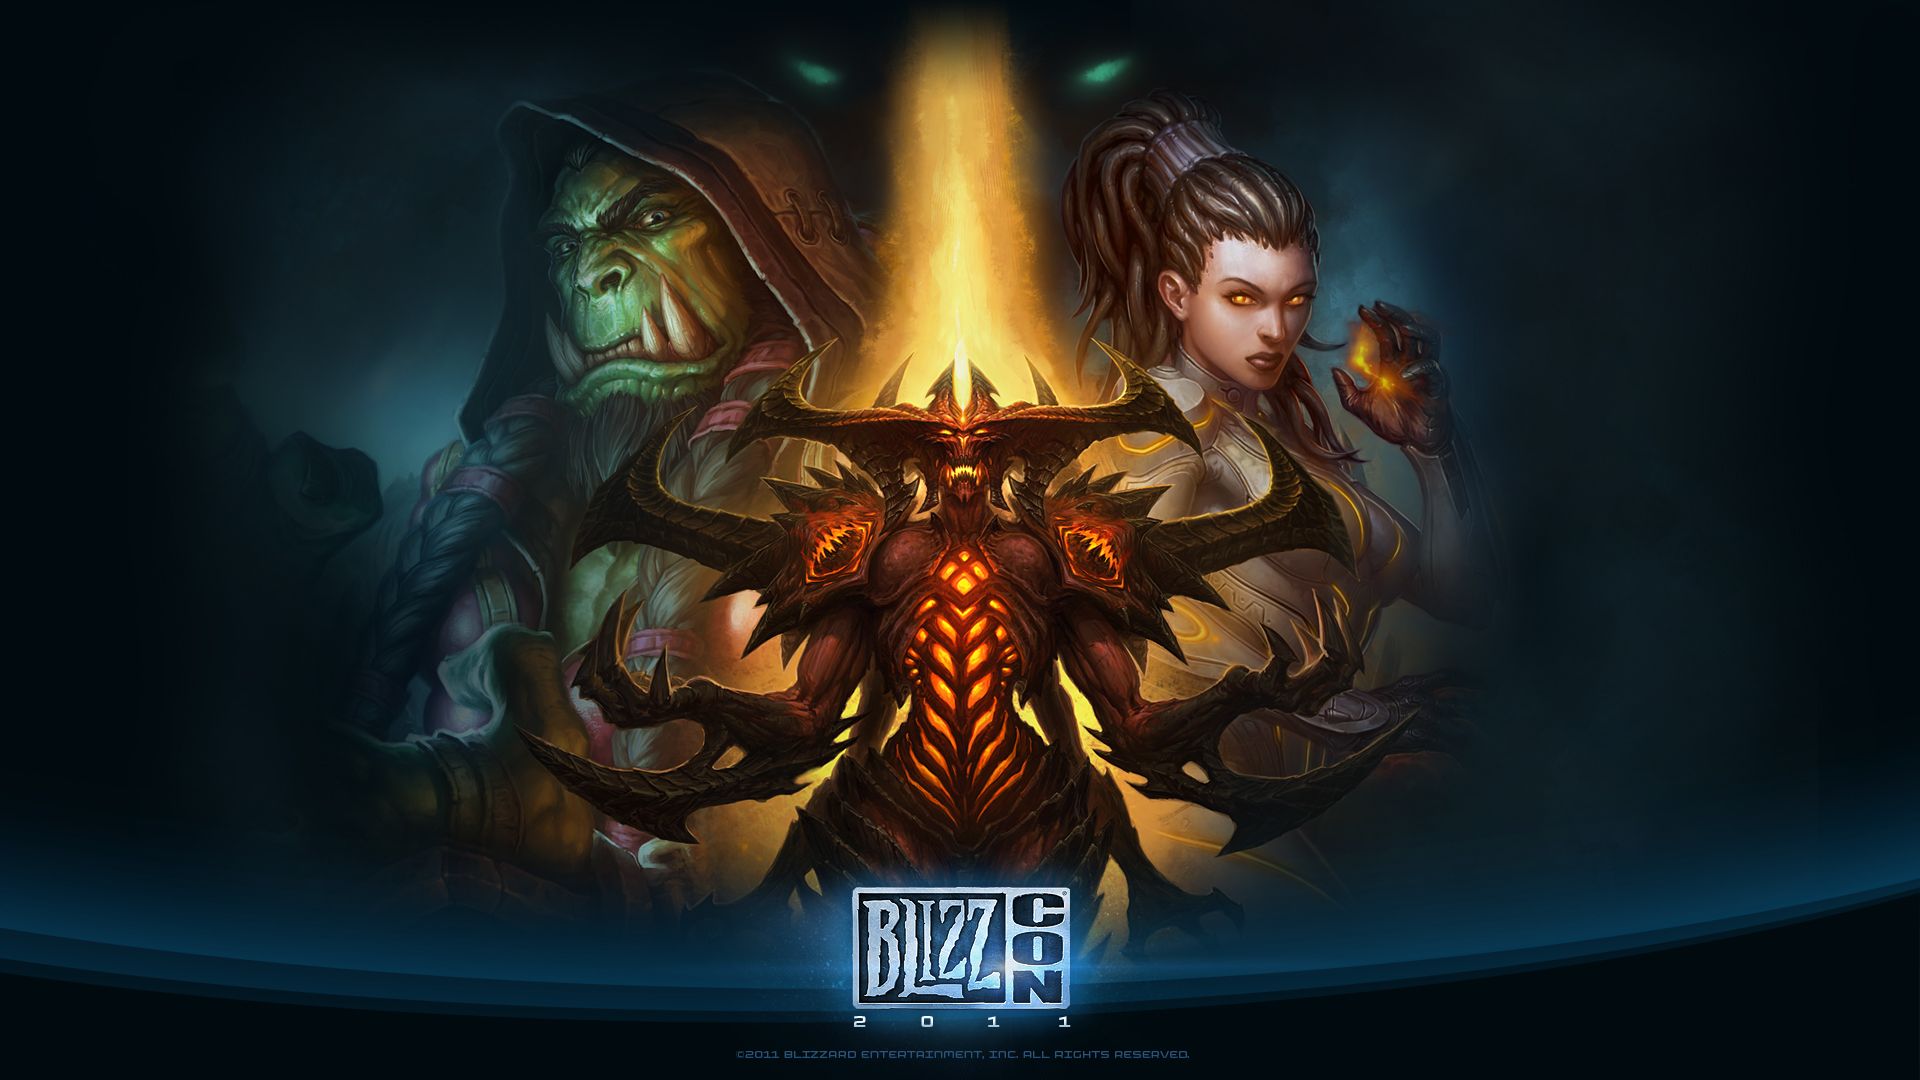 Wallpapers - Media - BlizzCon